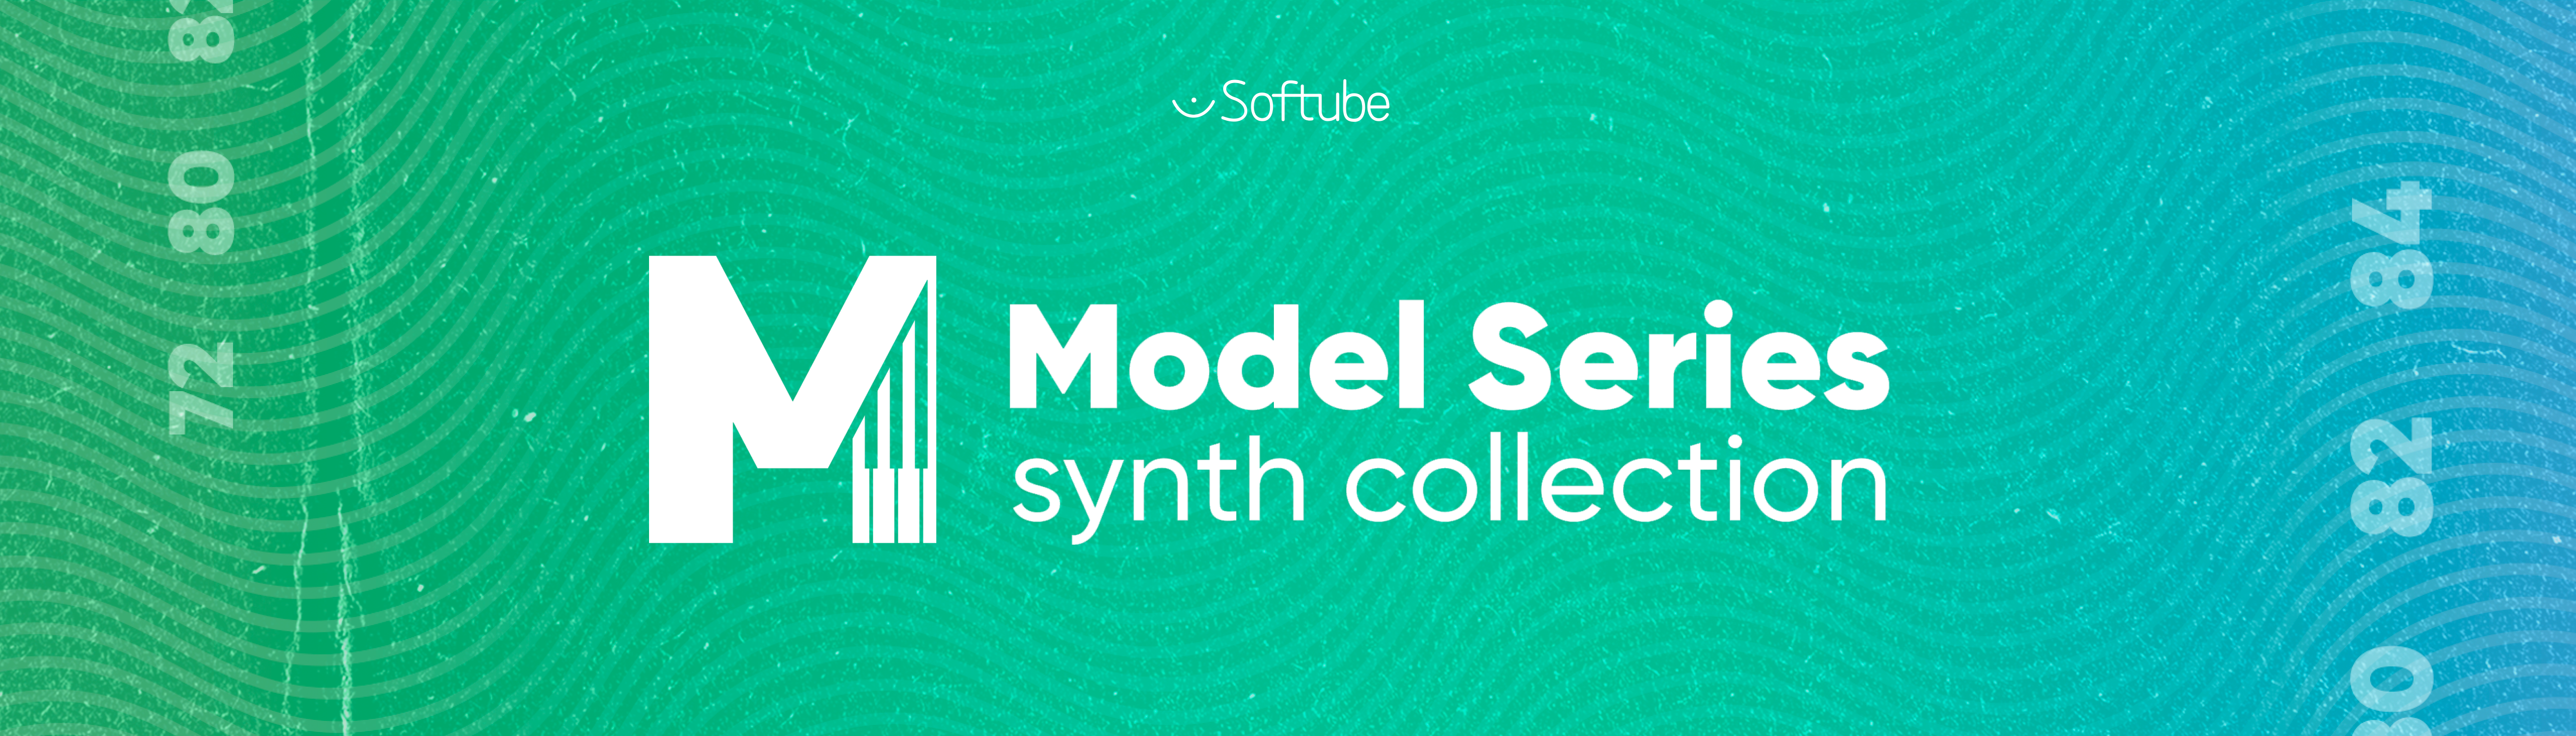 Softube Model Series Synth Collection header